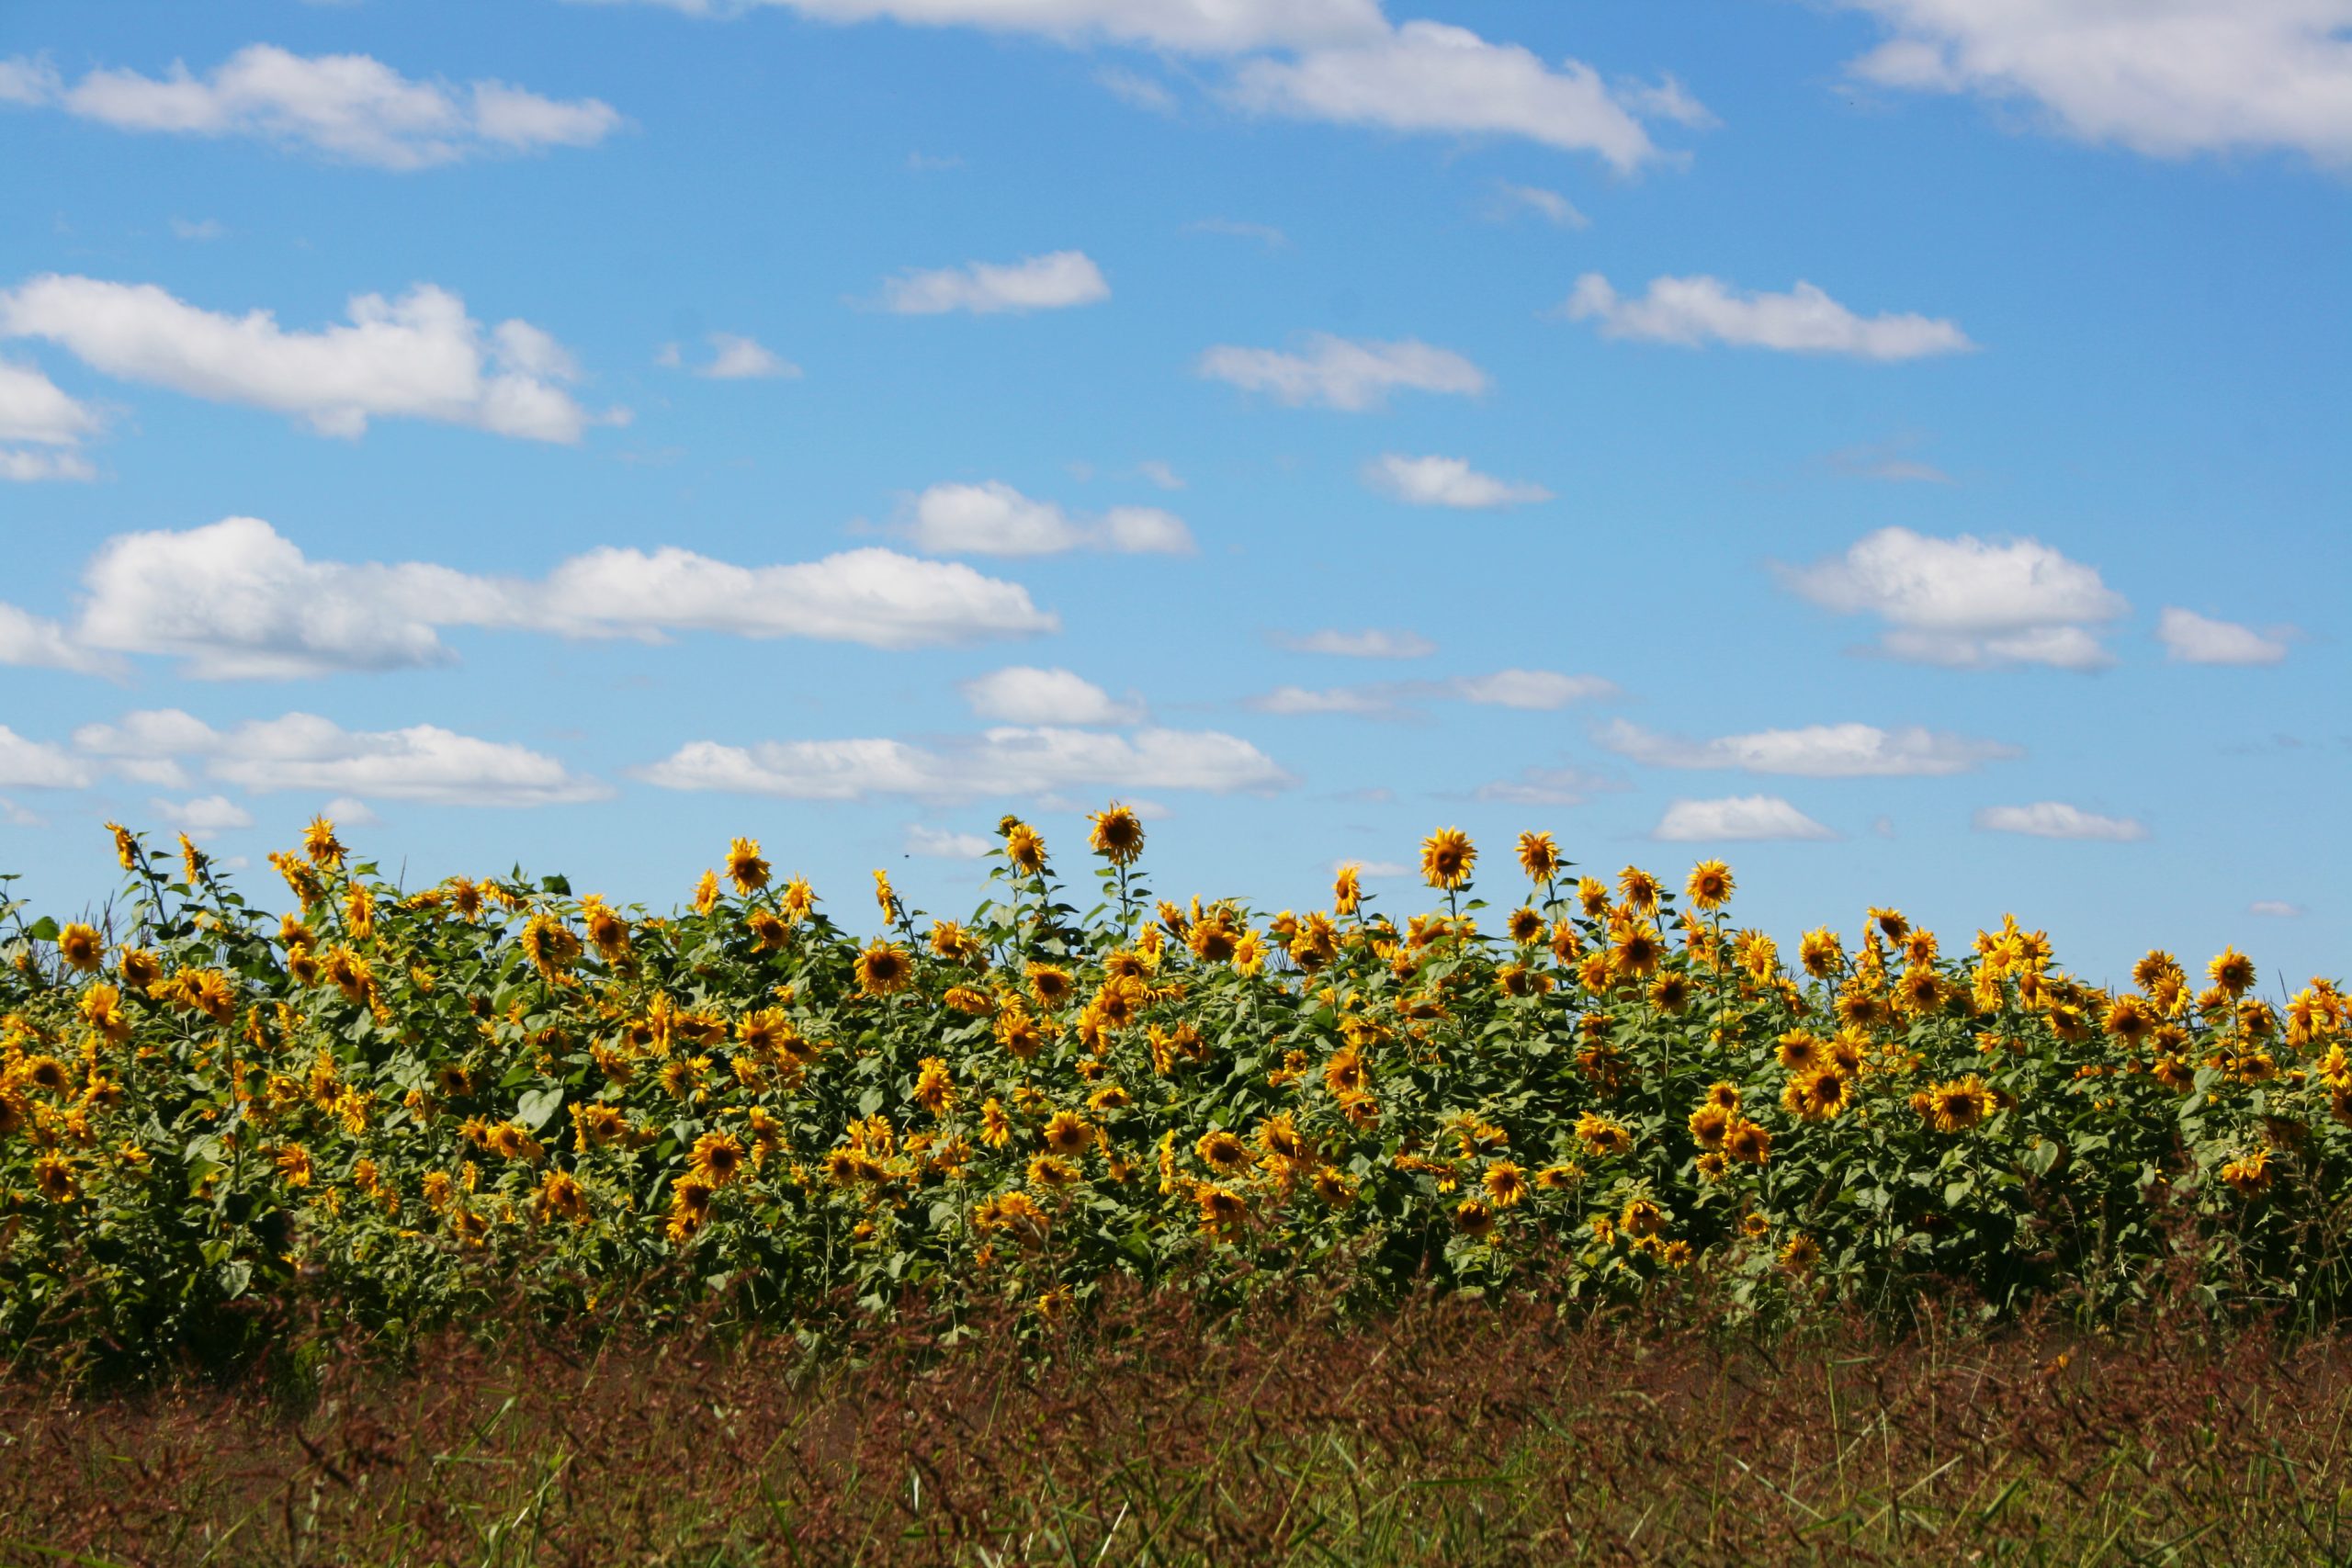 Sunflowers/corn Field (user submitted)